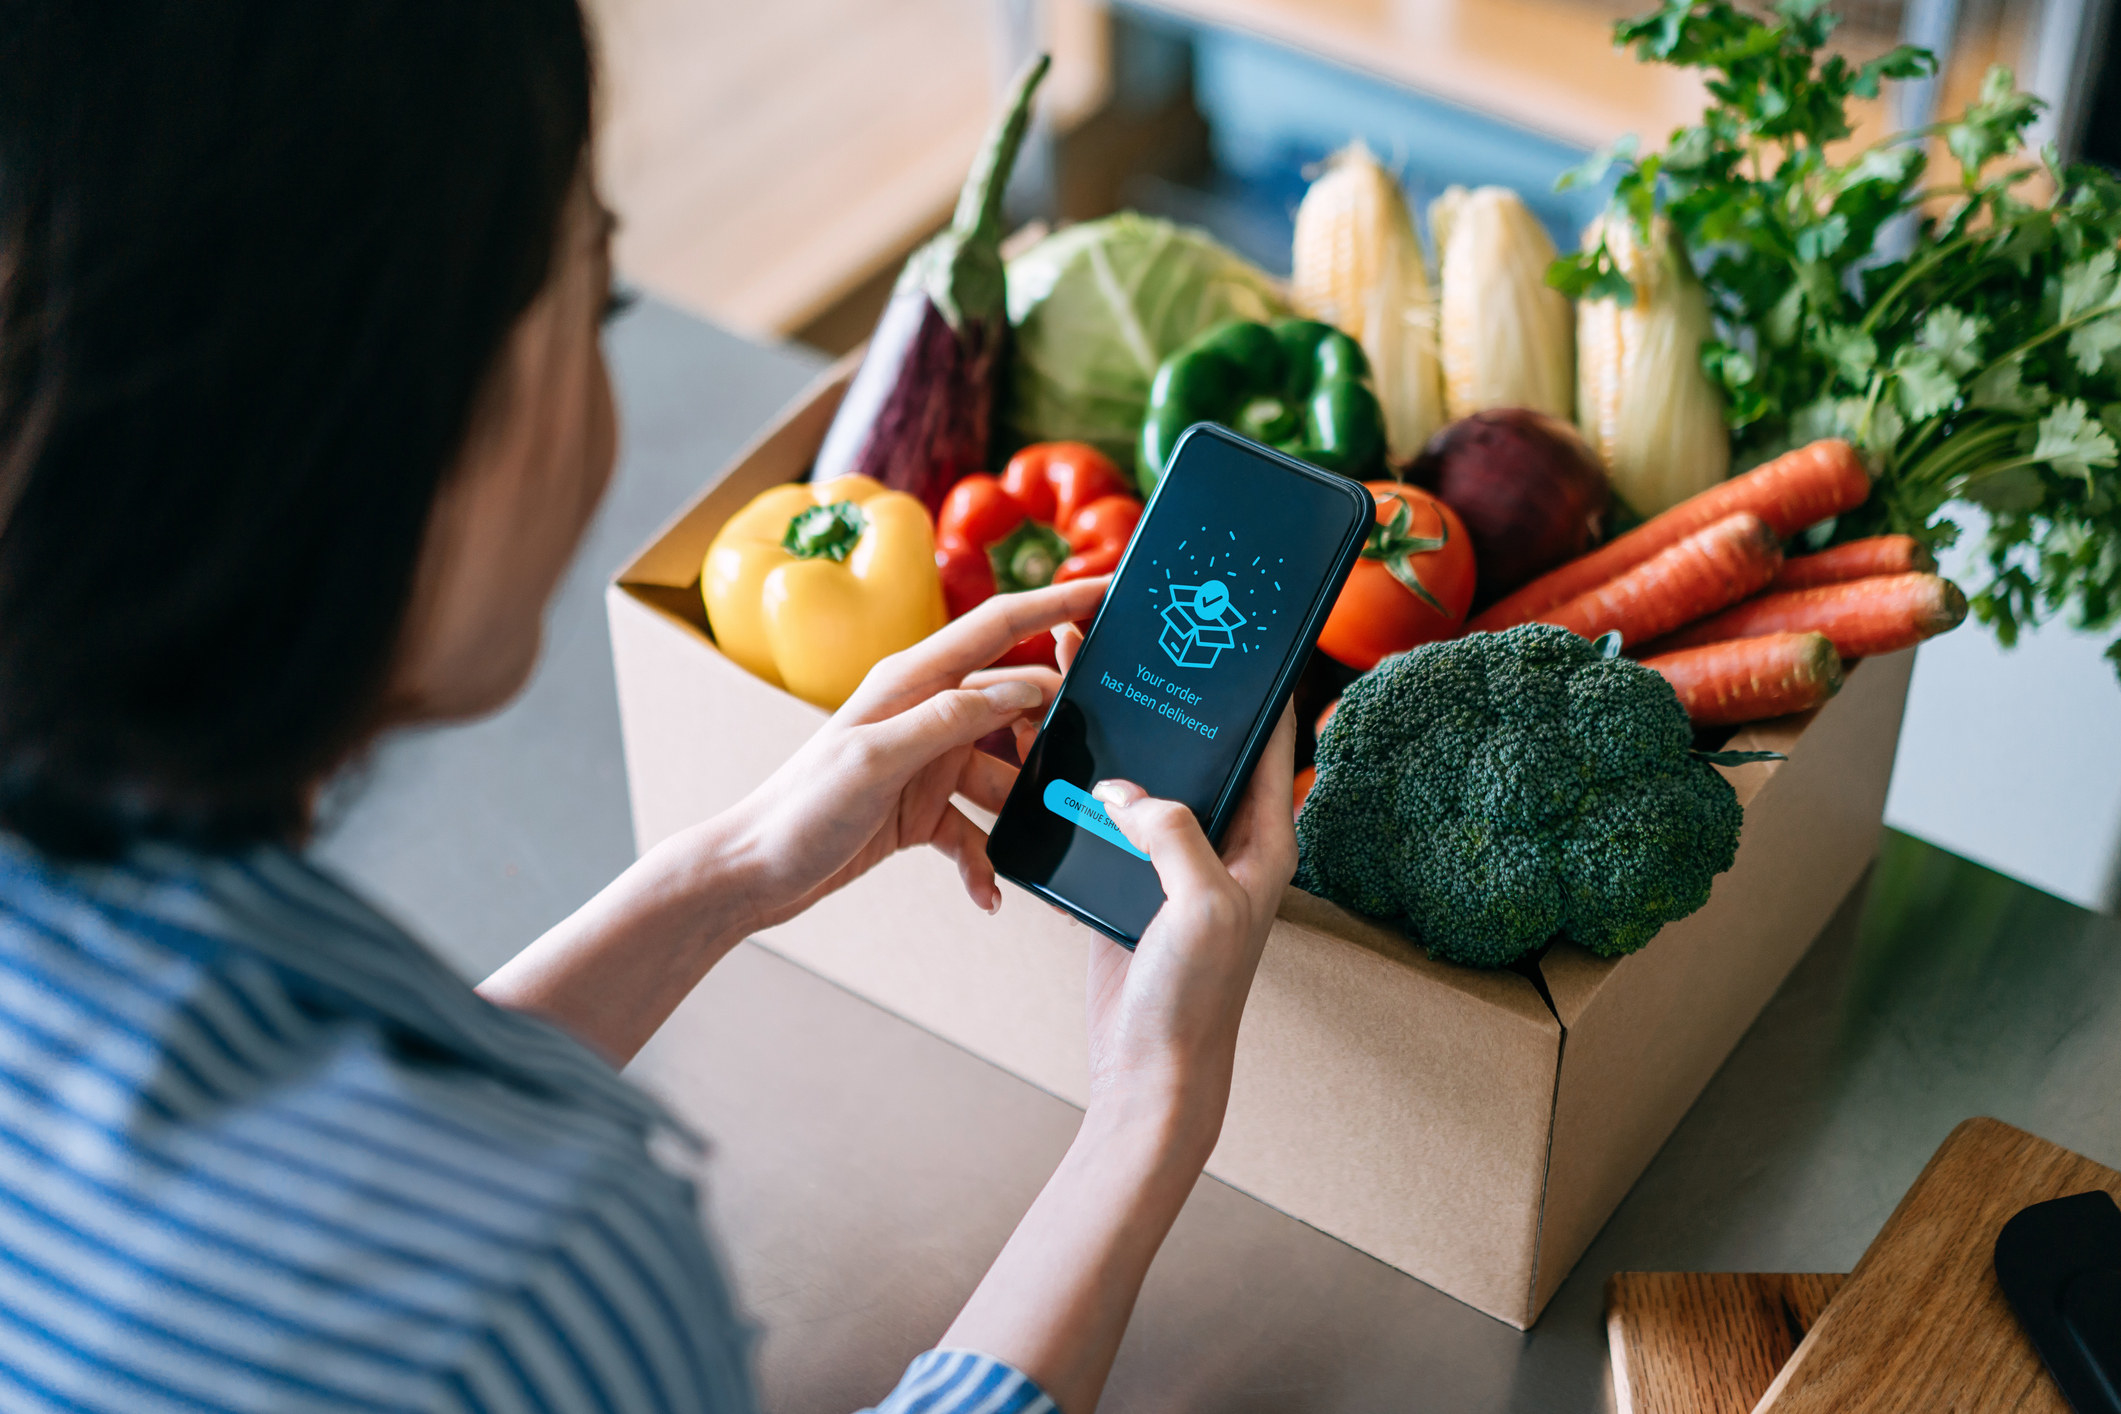 A person opens an app while looking at a box of vegetables